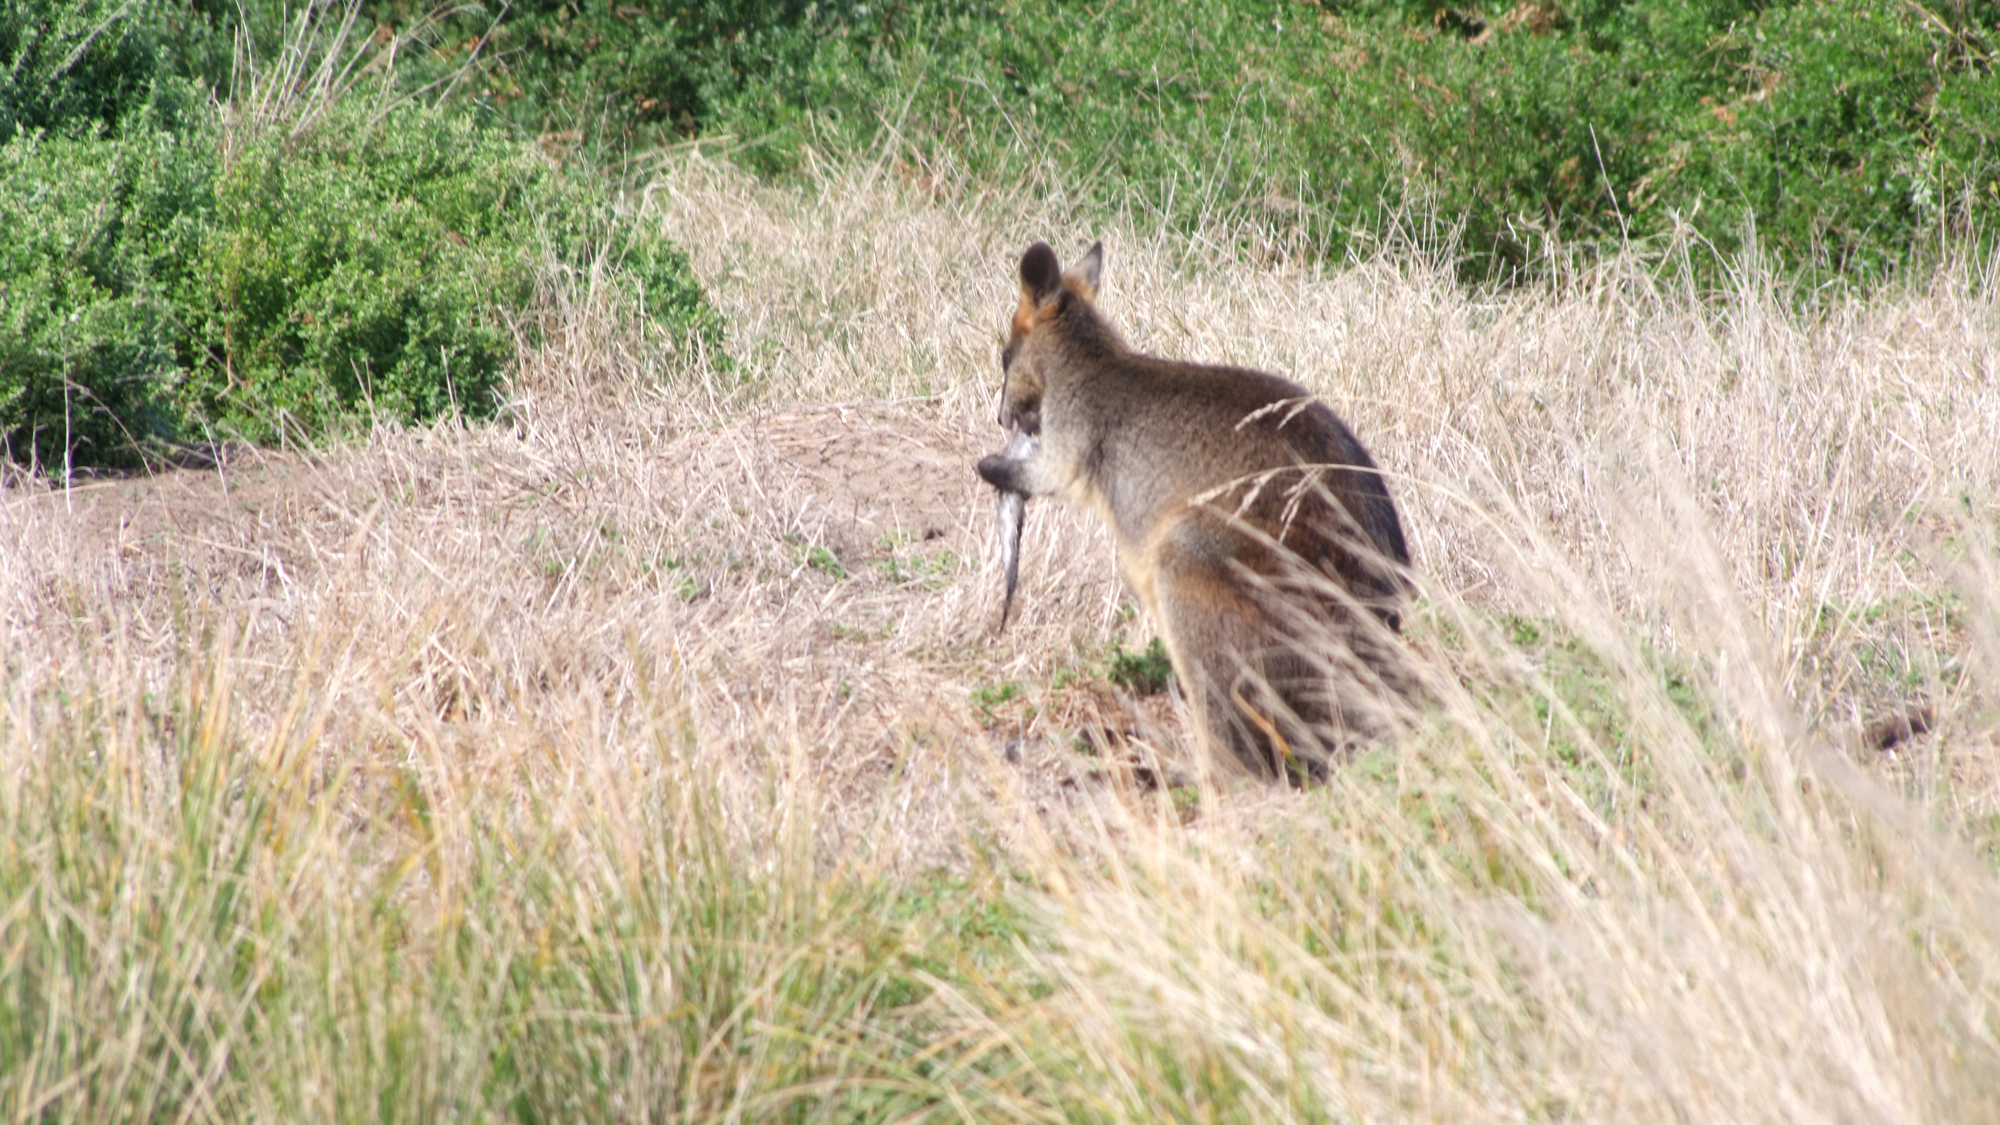 Swamp wallaby with wing of short-tailed shearwater in its mouth. Photo © James Fitzsimons